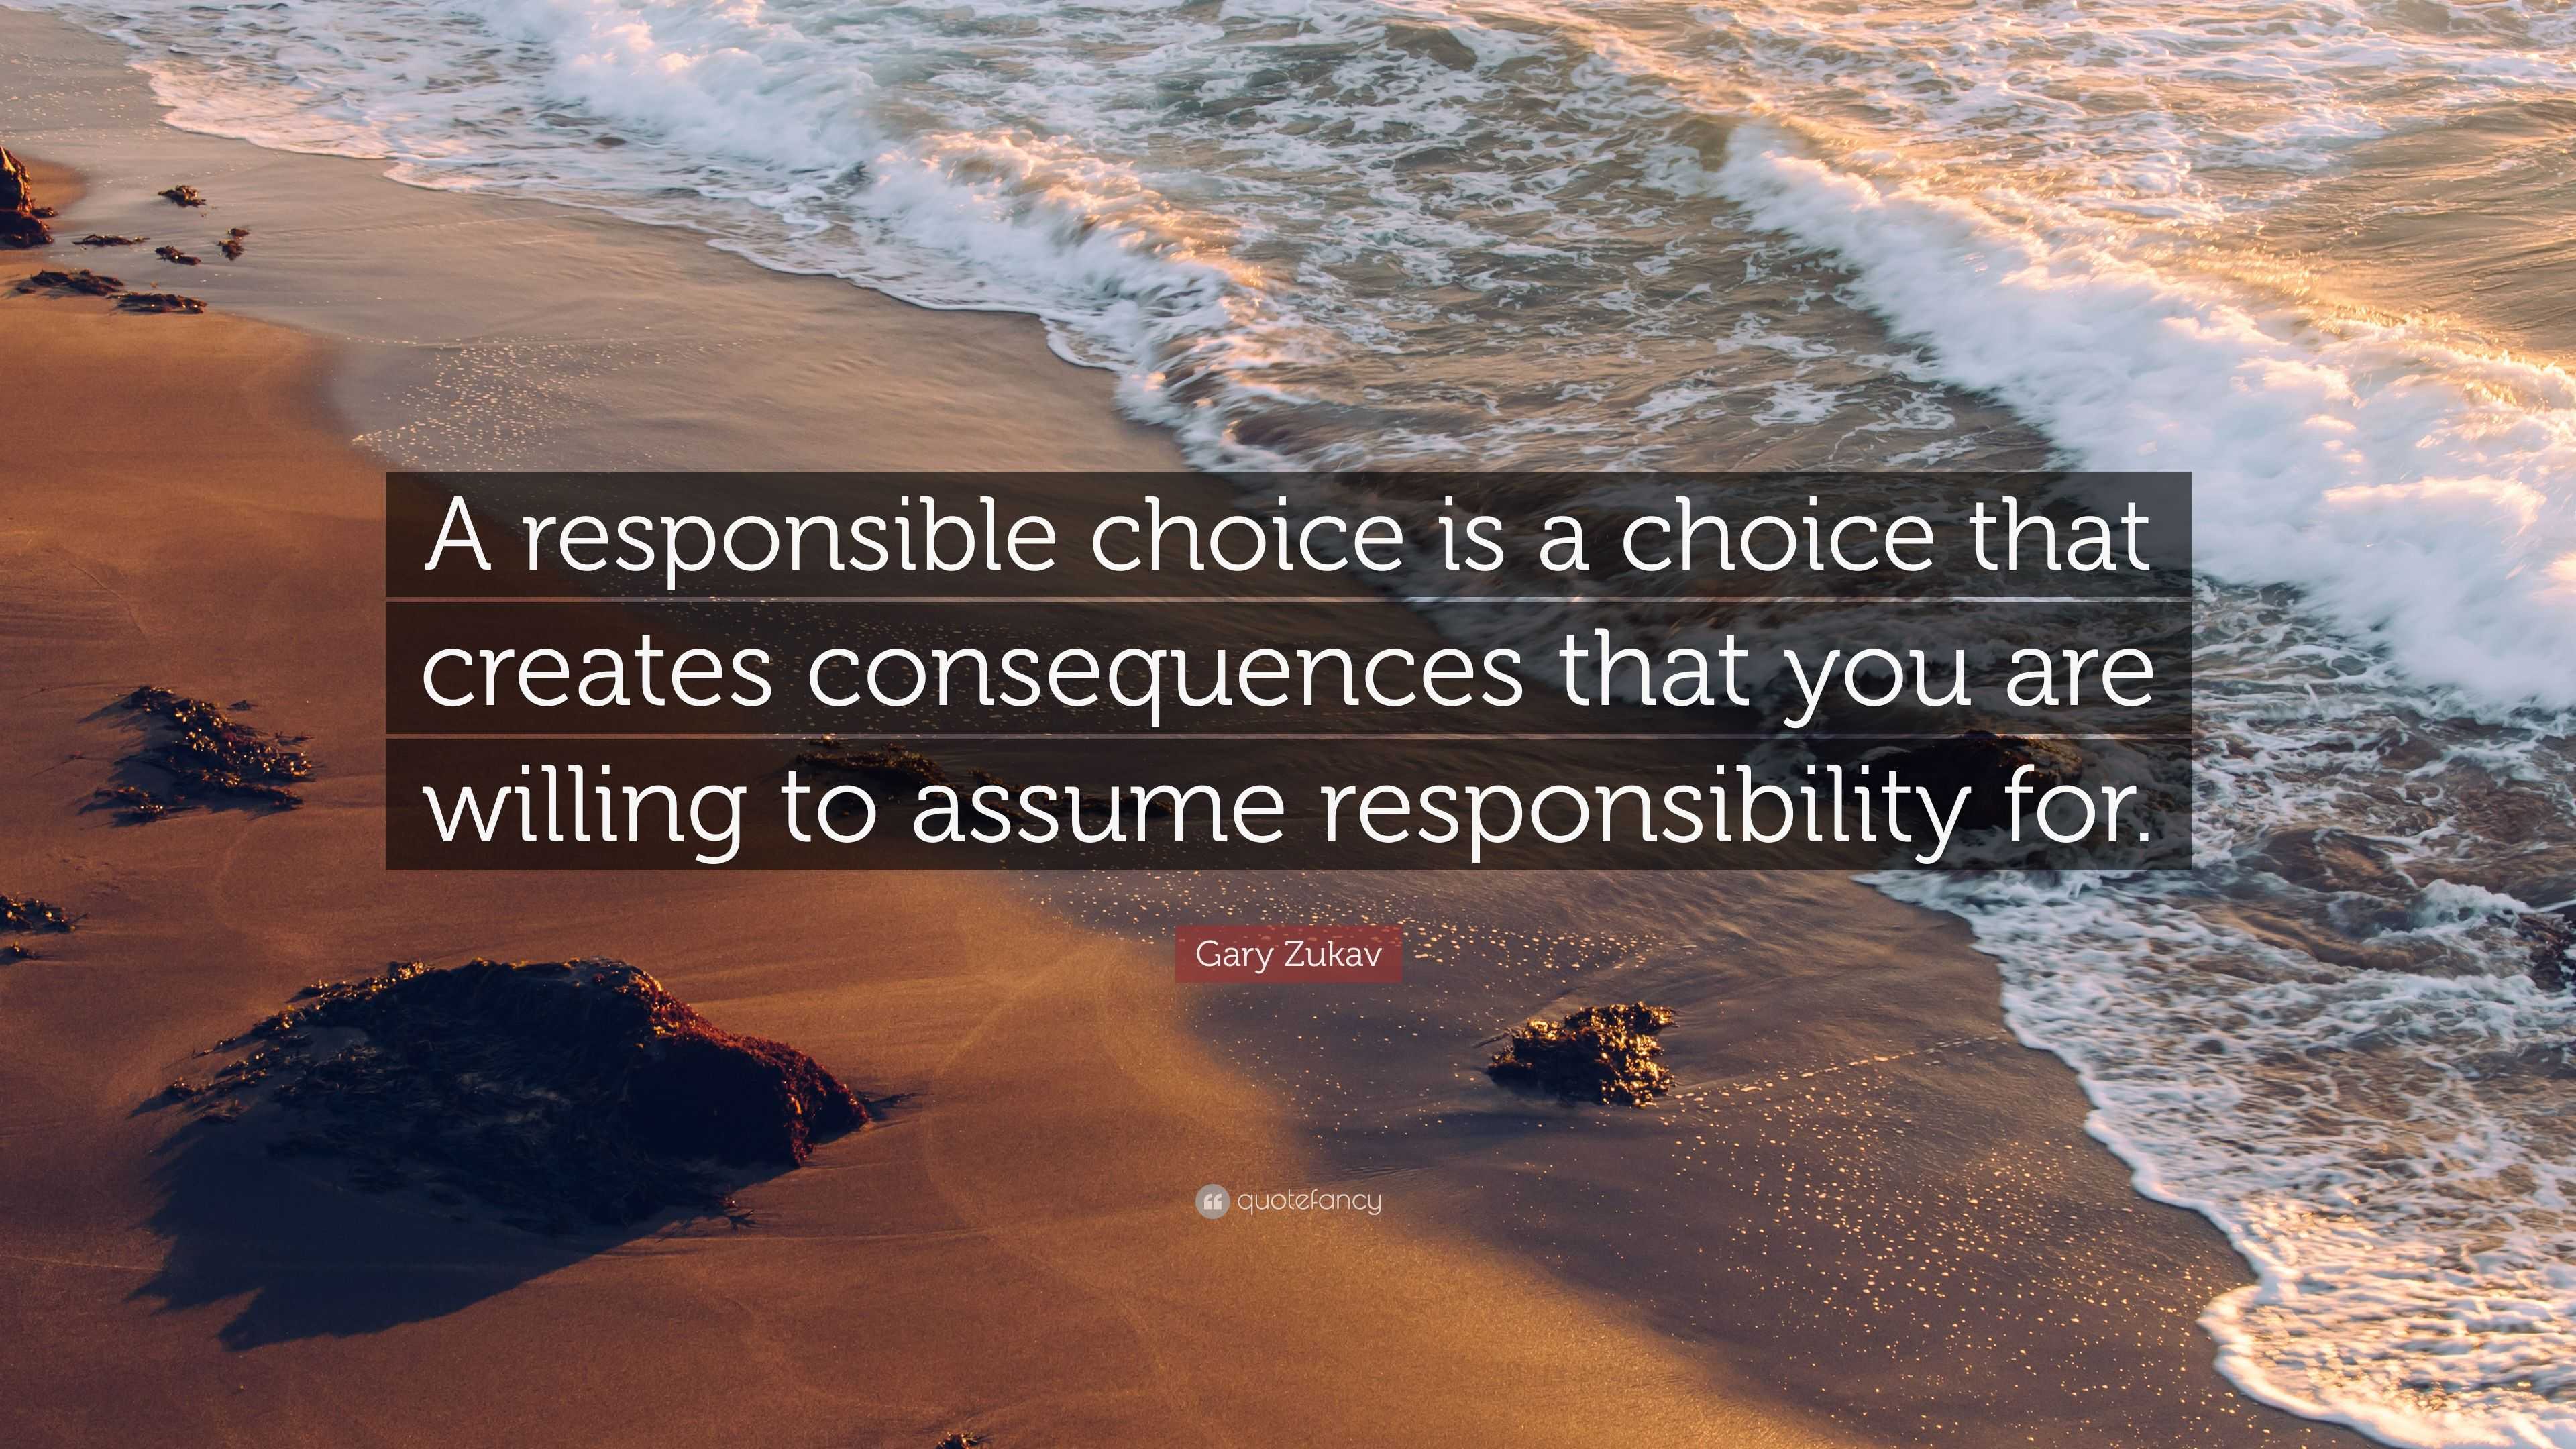 famous quotes about decisions and consequences